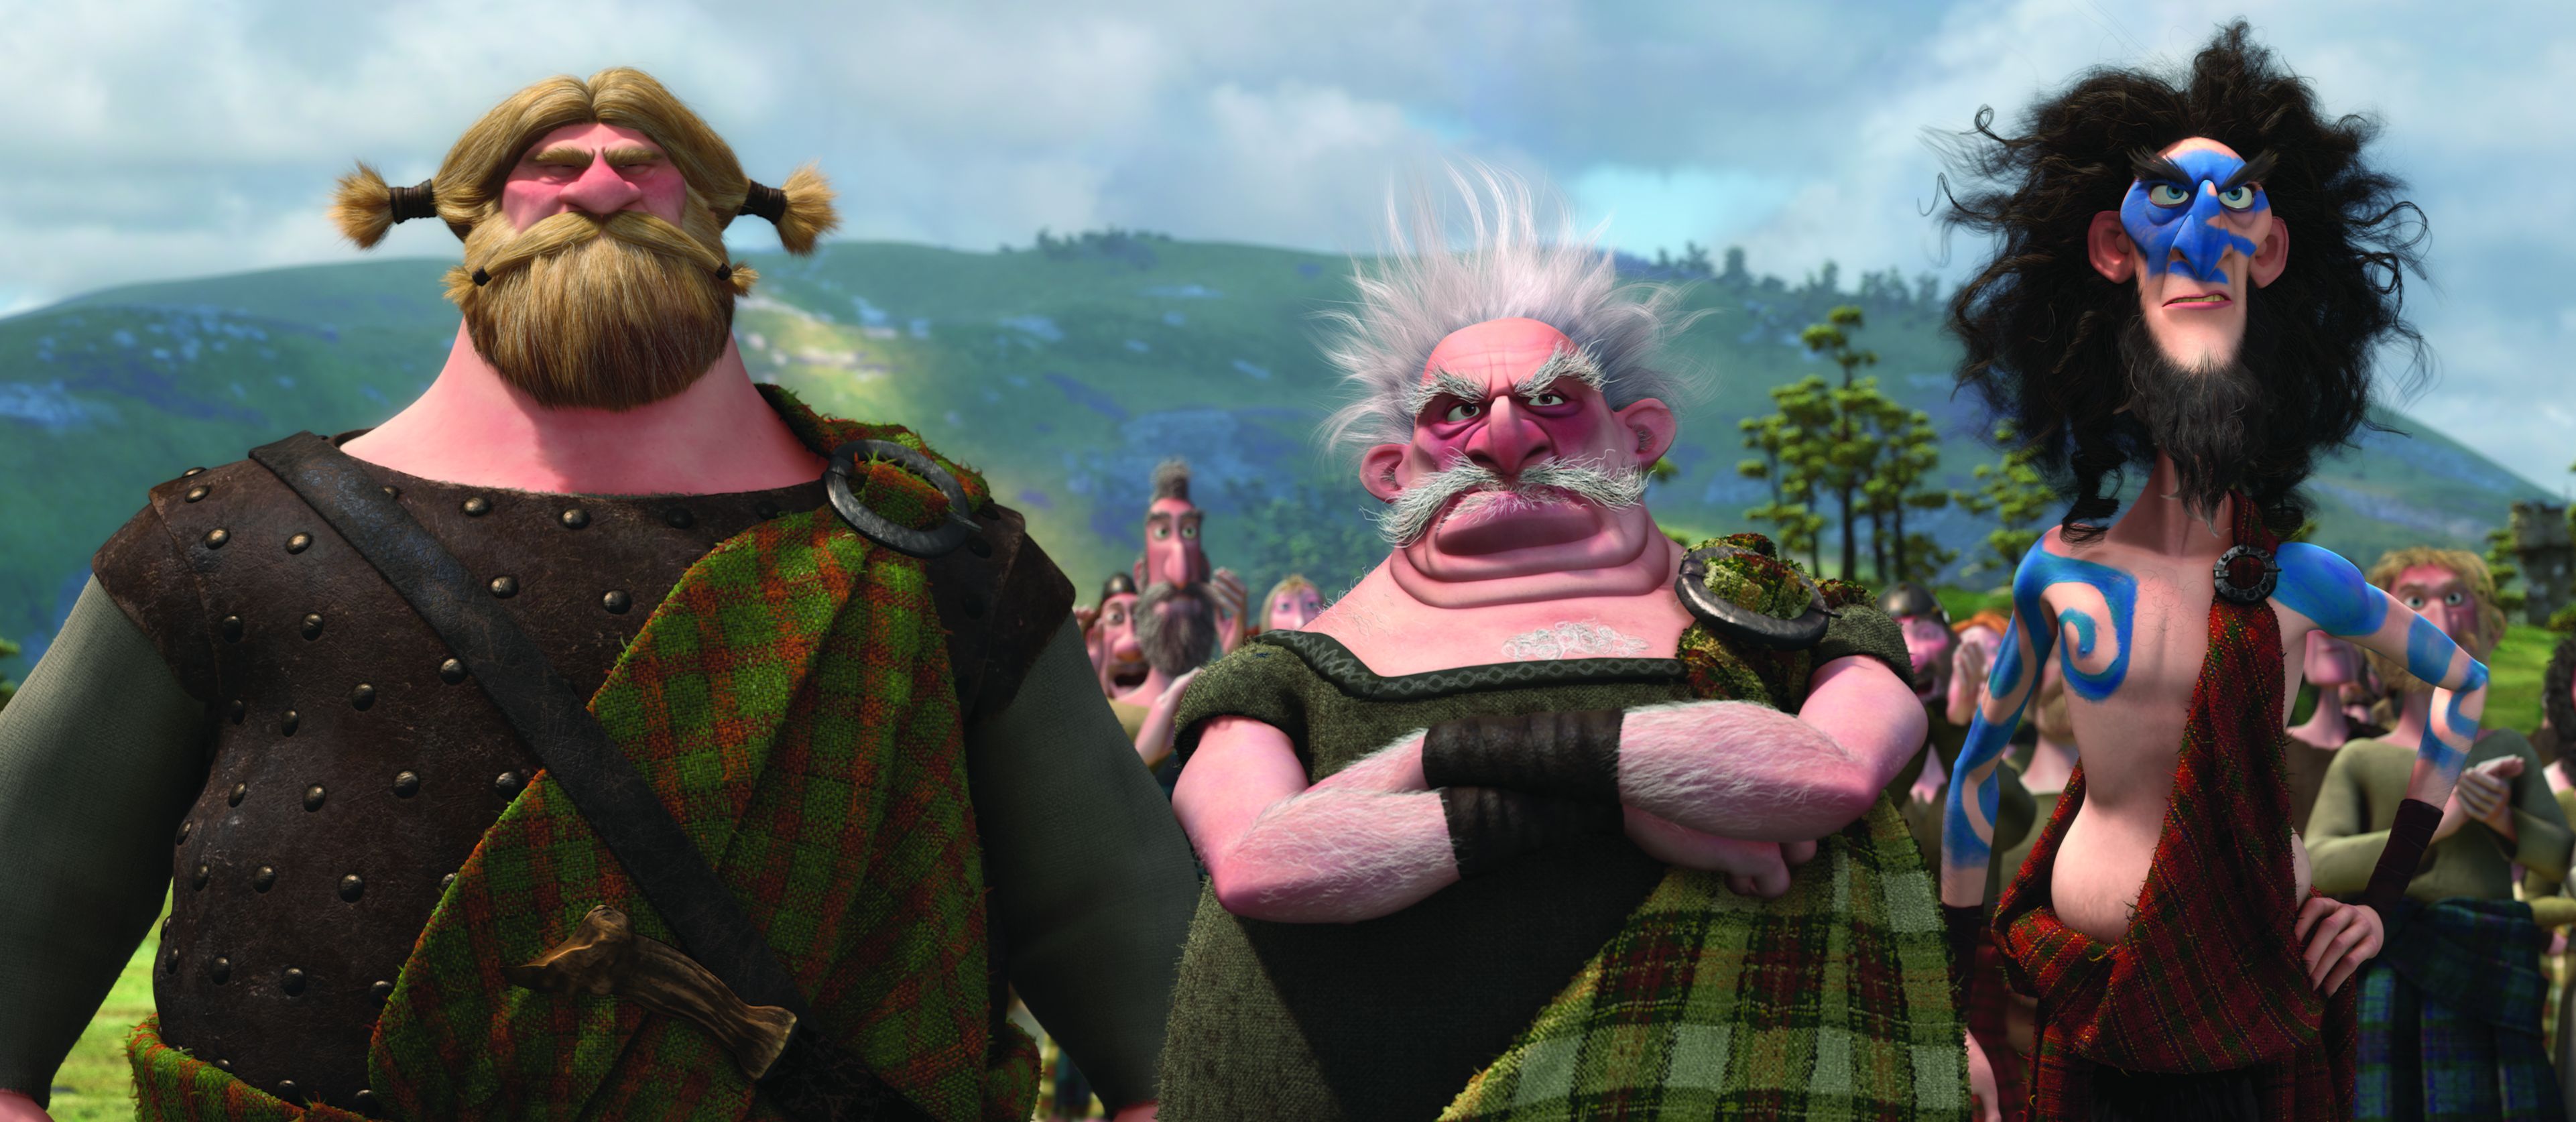 Lord MacGuffin, Lord Dingwall and Lord Macintosh in Brave